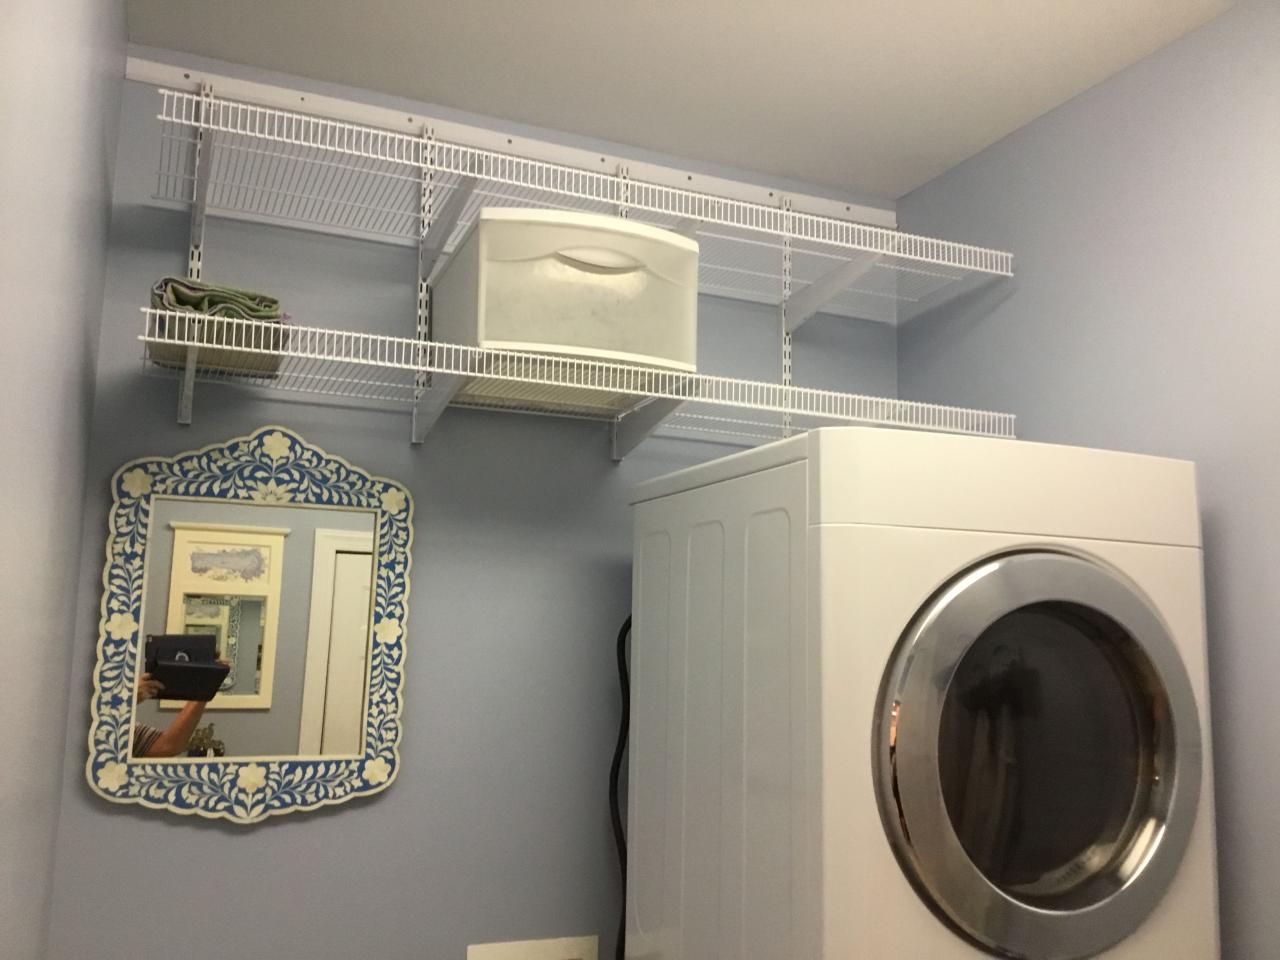 Pin by Joanne Baker on Laundry Room Old & New Hanging clothes racks